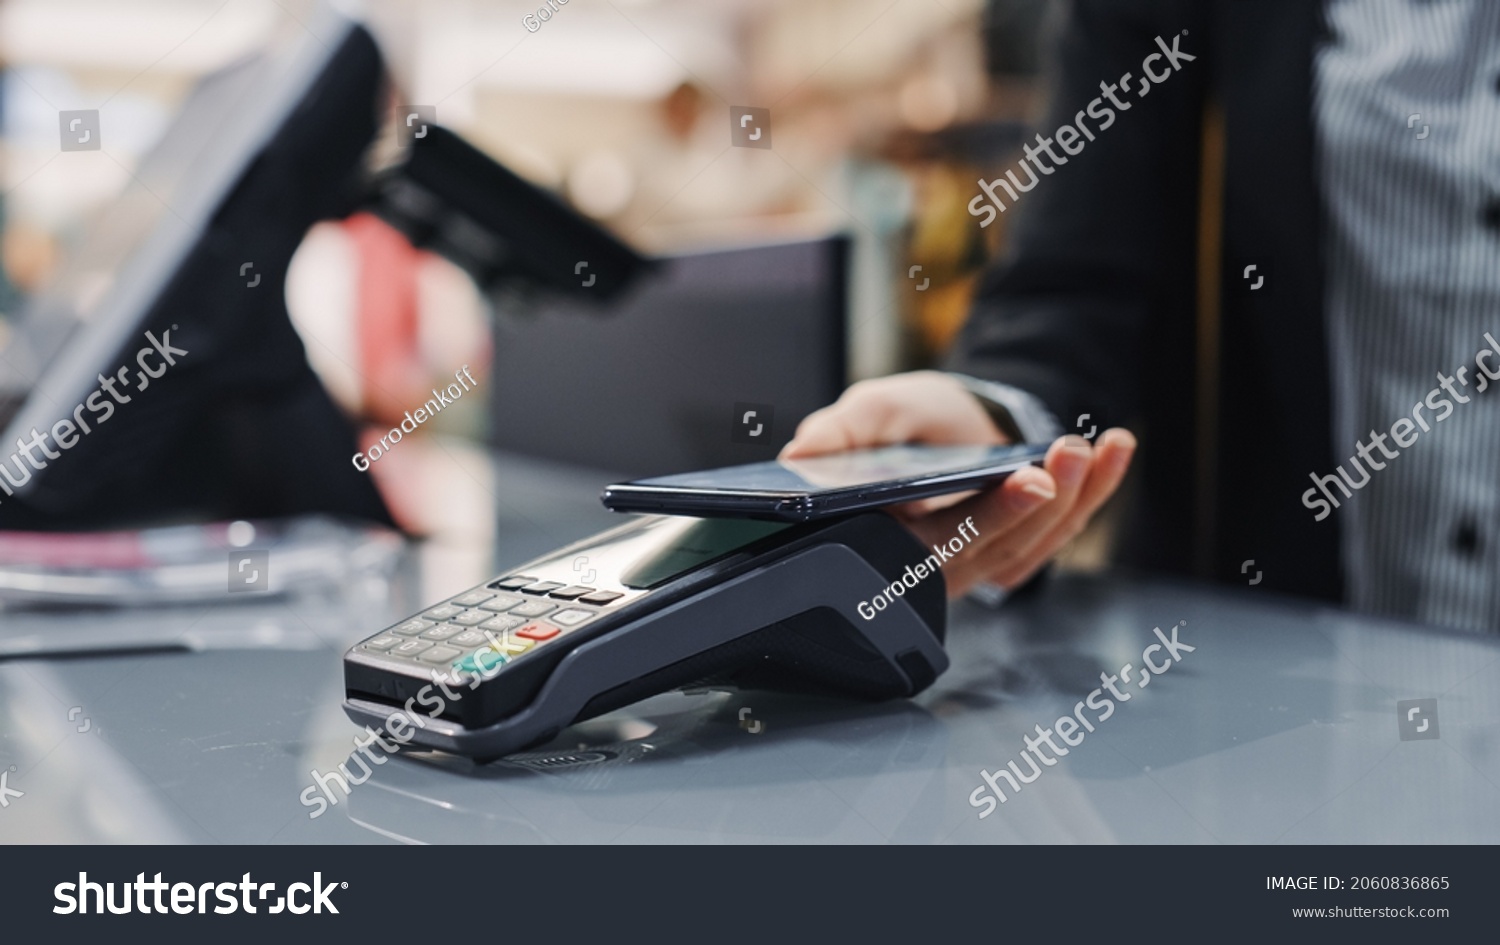 Clothing Store: Woman At Counter Buys Clothes Paying with Smartphone Through, Contactless NFC Terminal. Department Store, Shopping Center, Mall Purchase. Close-up Focus on Mobile Phone #2060836865